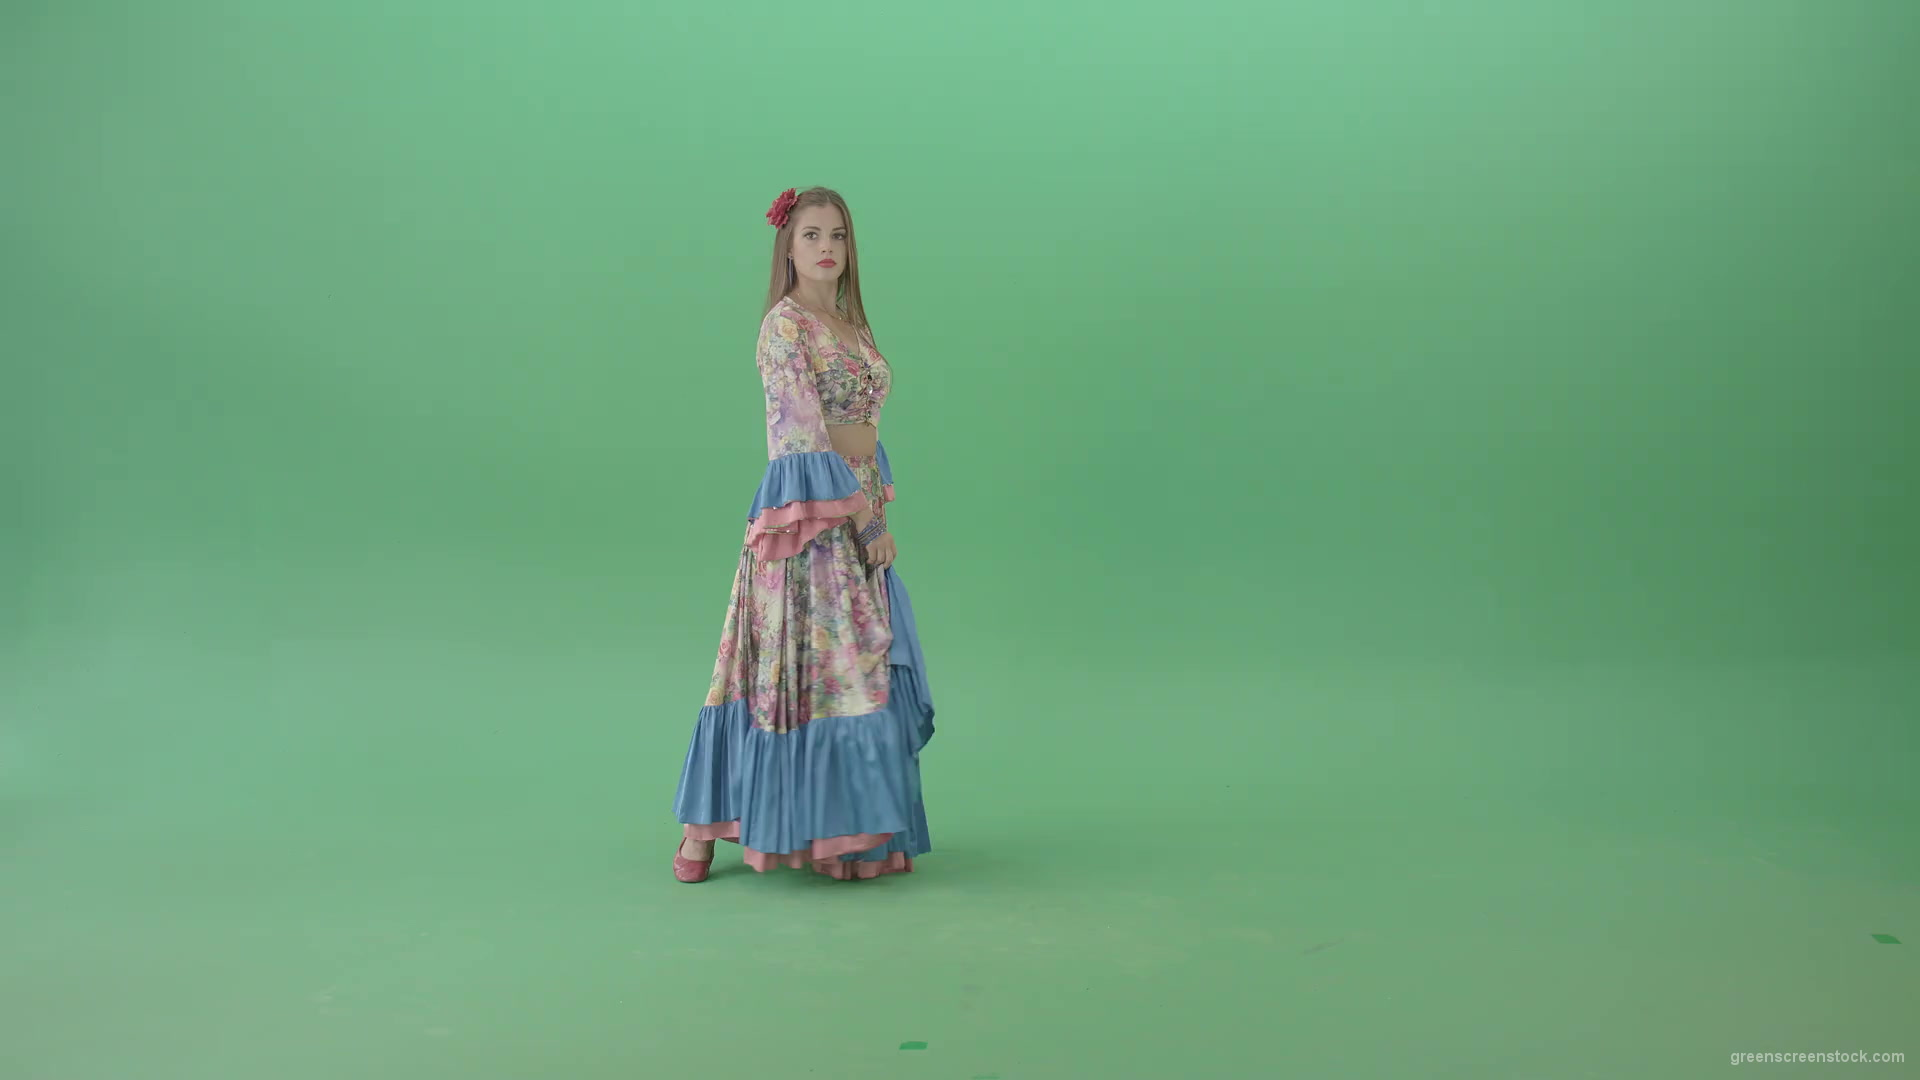 Elegant-movement-by-Gypsy-girl-in-moldova-costume-isolated-on-green-screen-4K-Video-Footage-clip-1920_001 Green Screen Stock